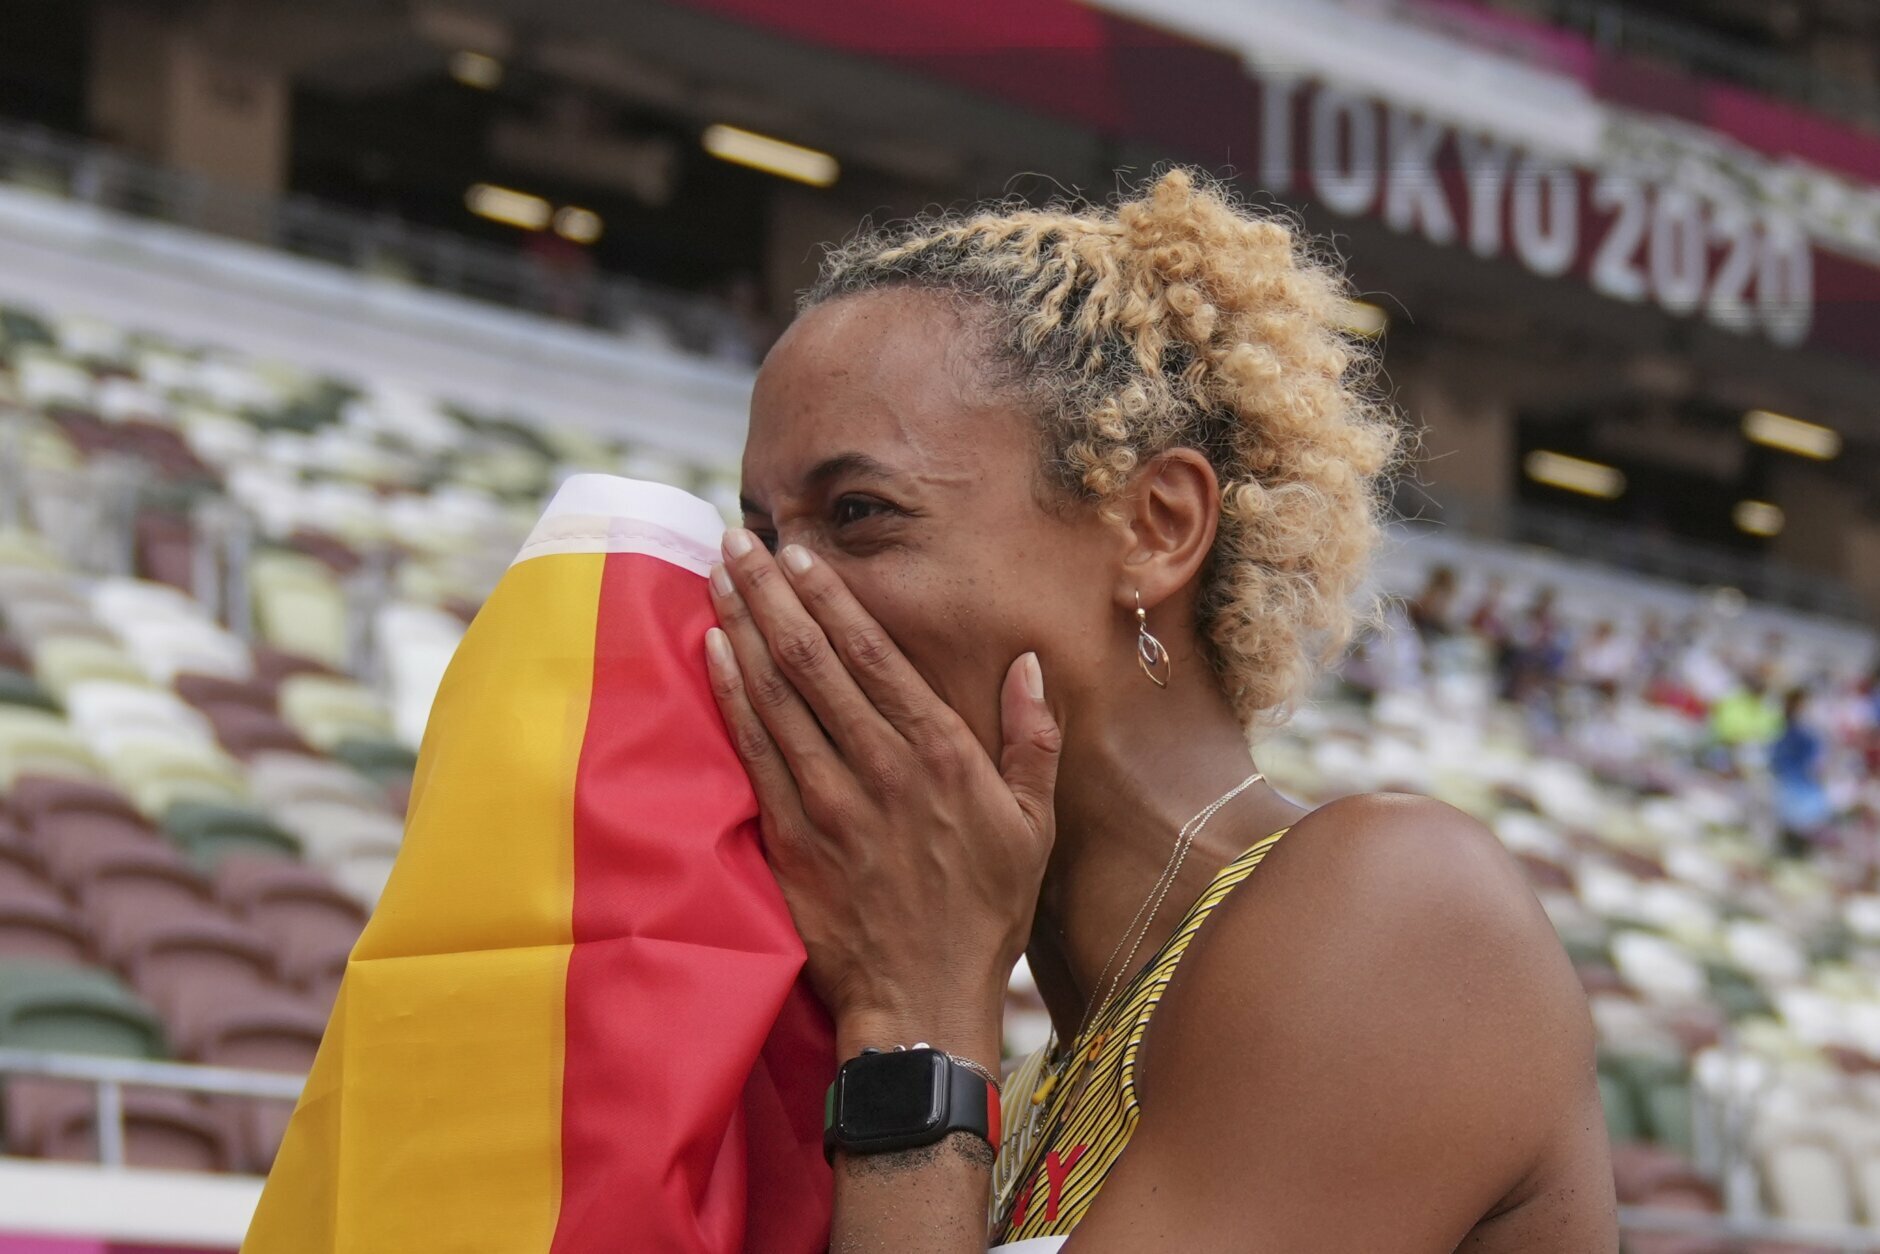 Malaika Mihambo, of Germany, celebrates after winning the gold medal in the women's long jump final at the 2020 Summer Olympics, Tuesday, Aug. 3, 2021, in Tokyo. (AP Photo/Matthias Schrader)